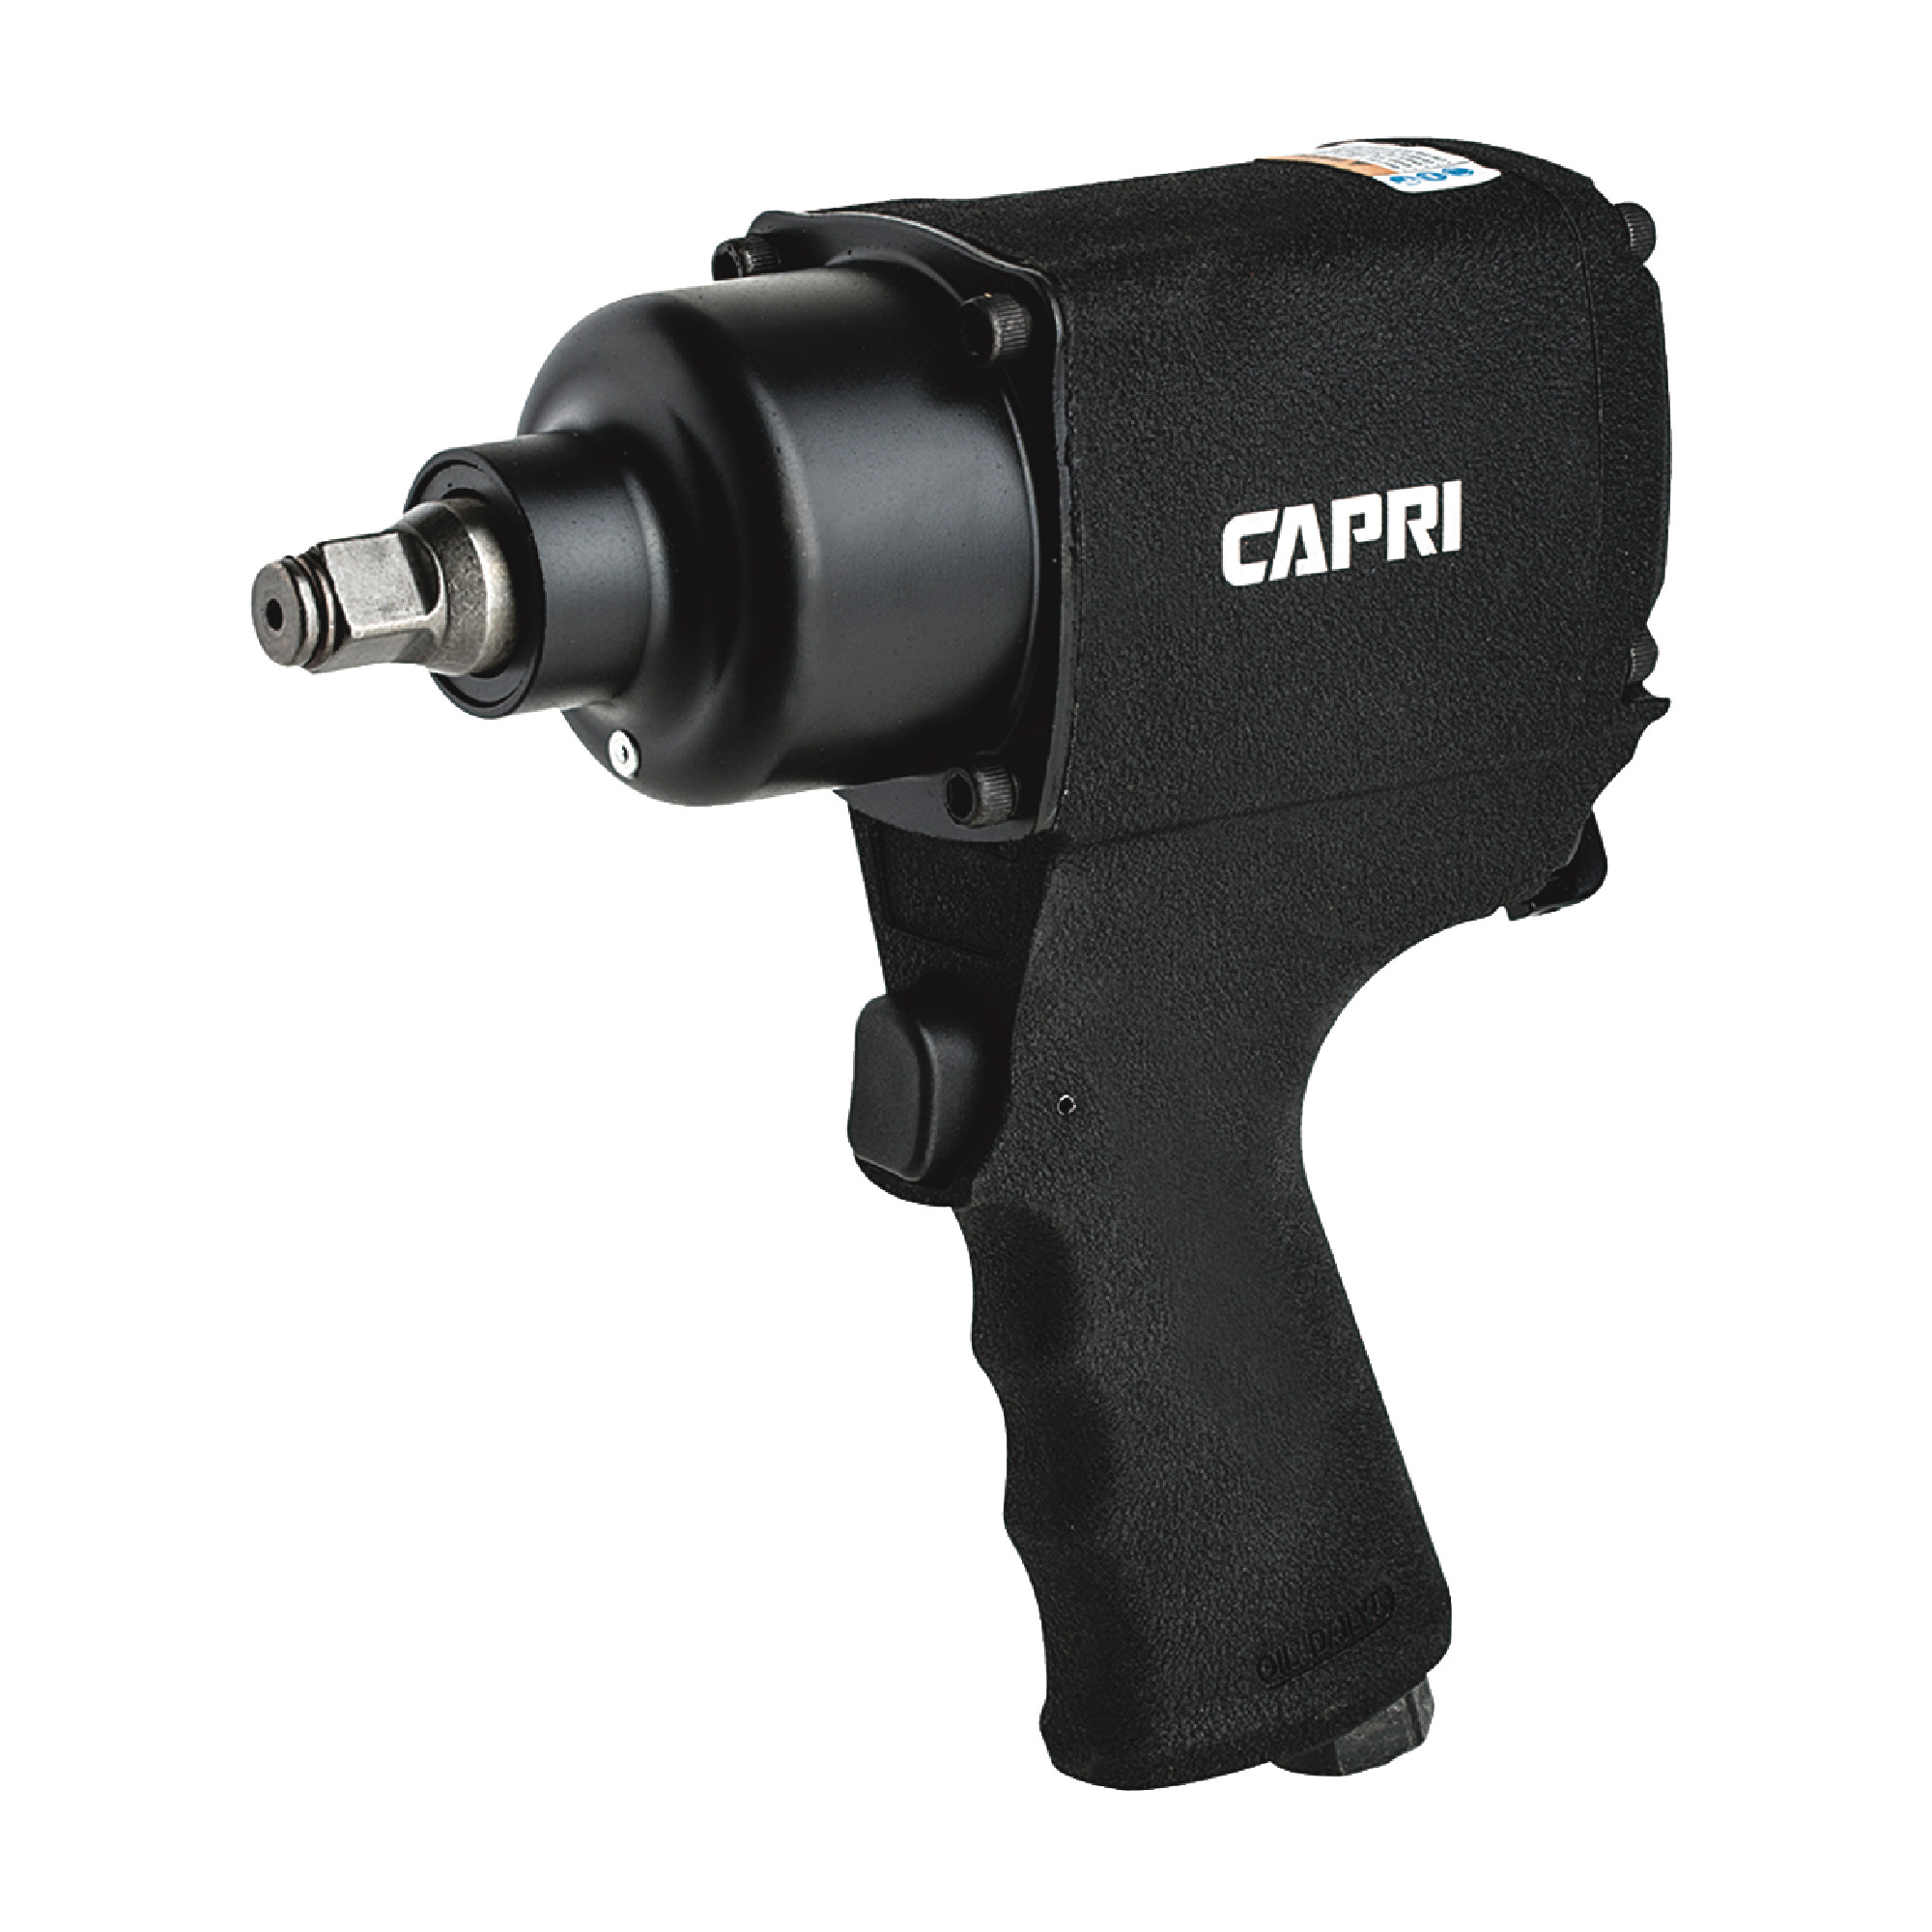 1/2" High Torque Impact Wrench